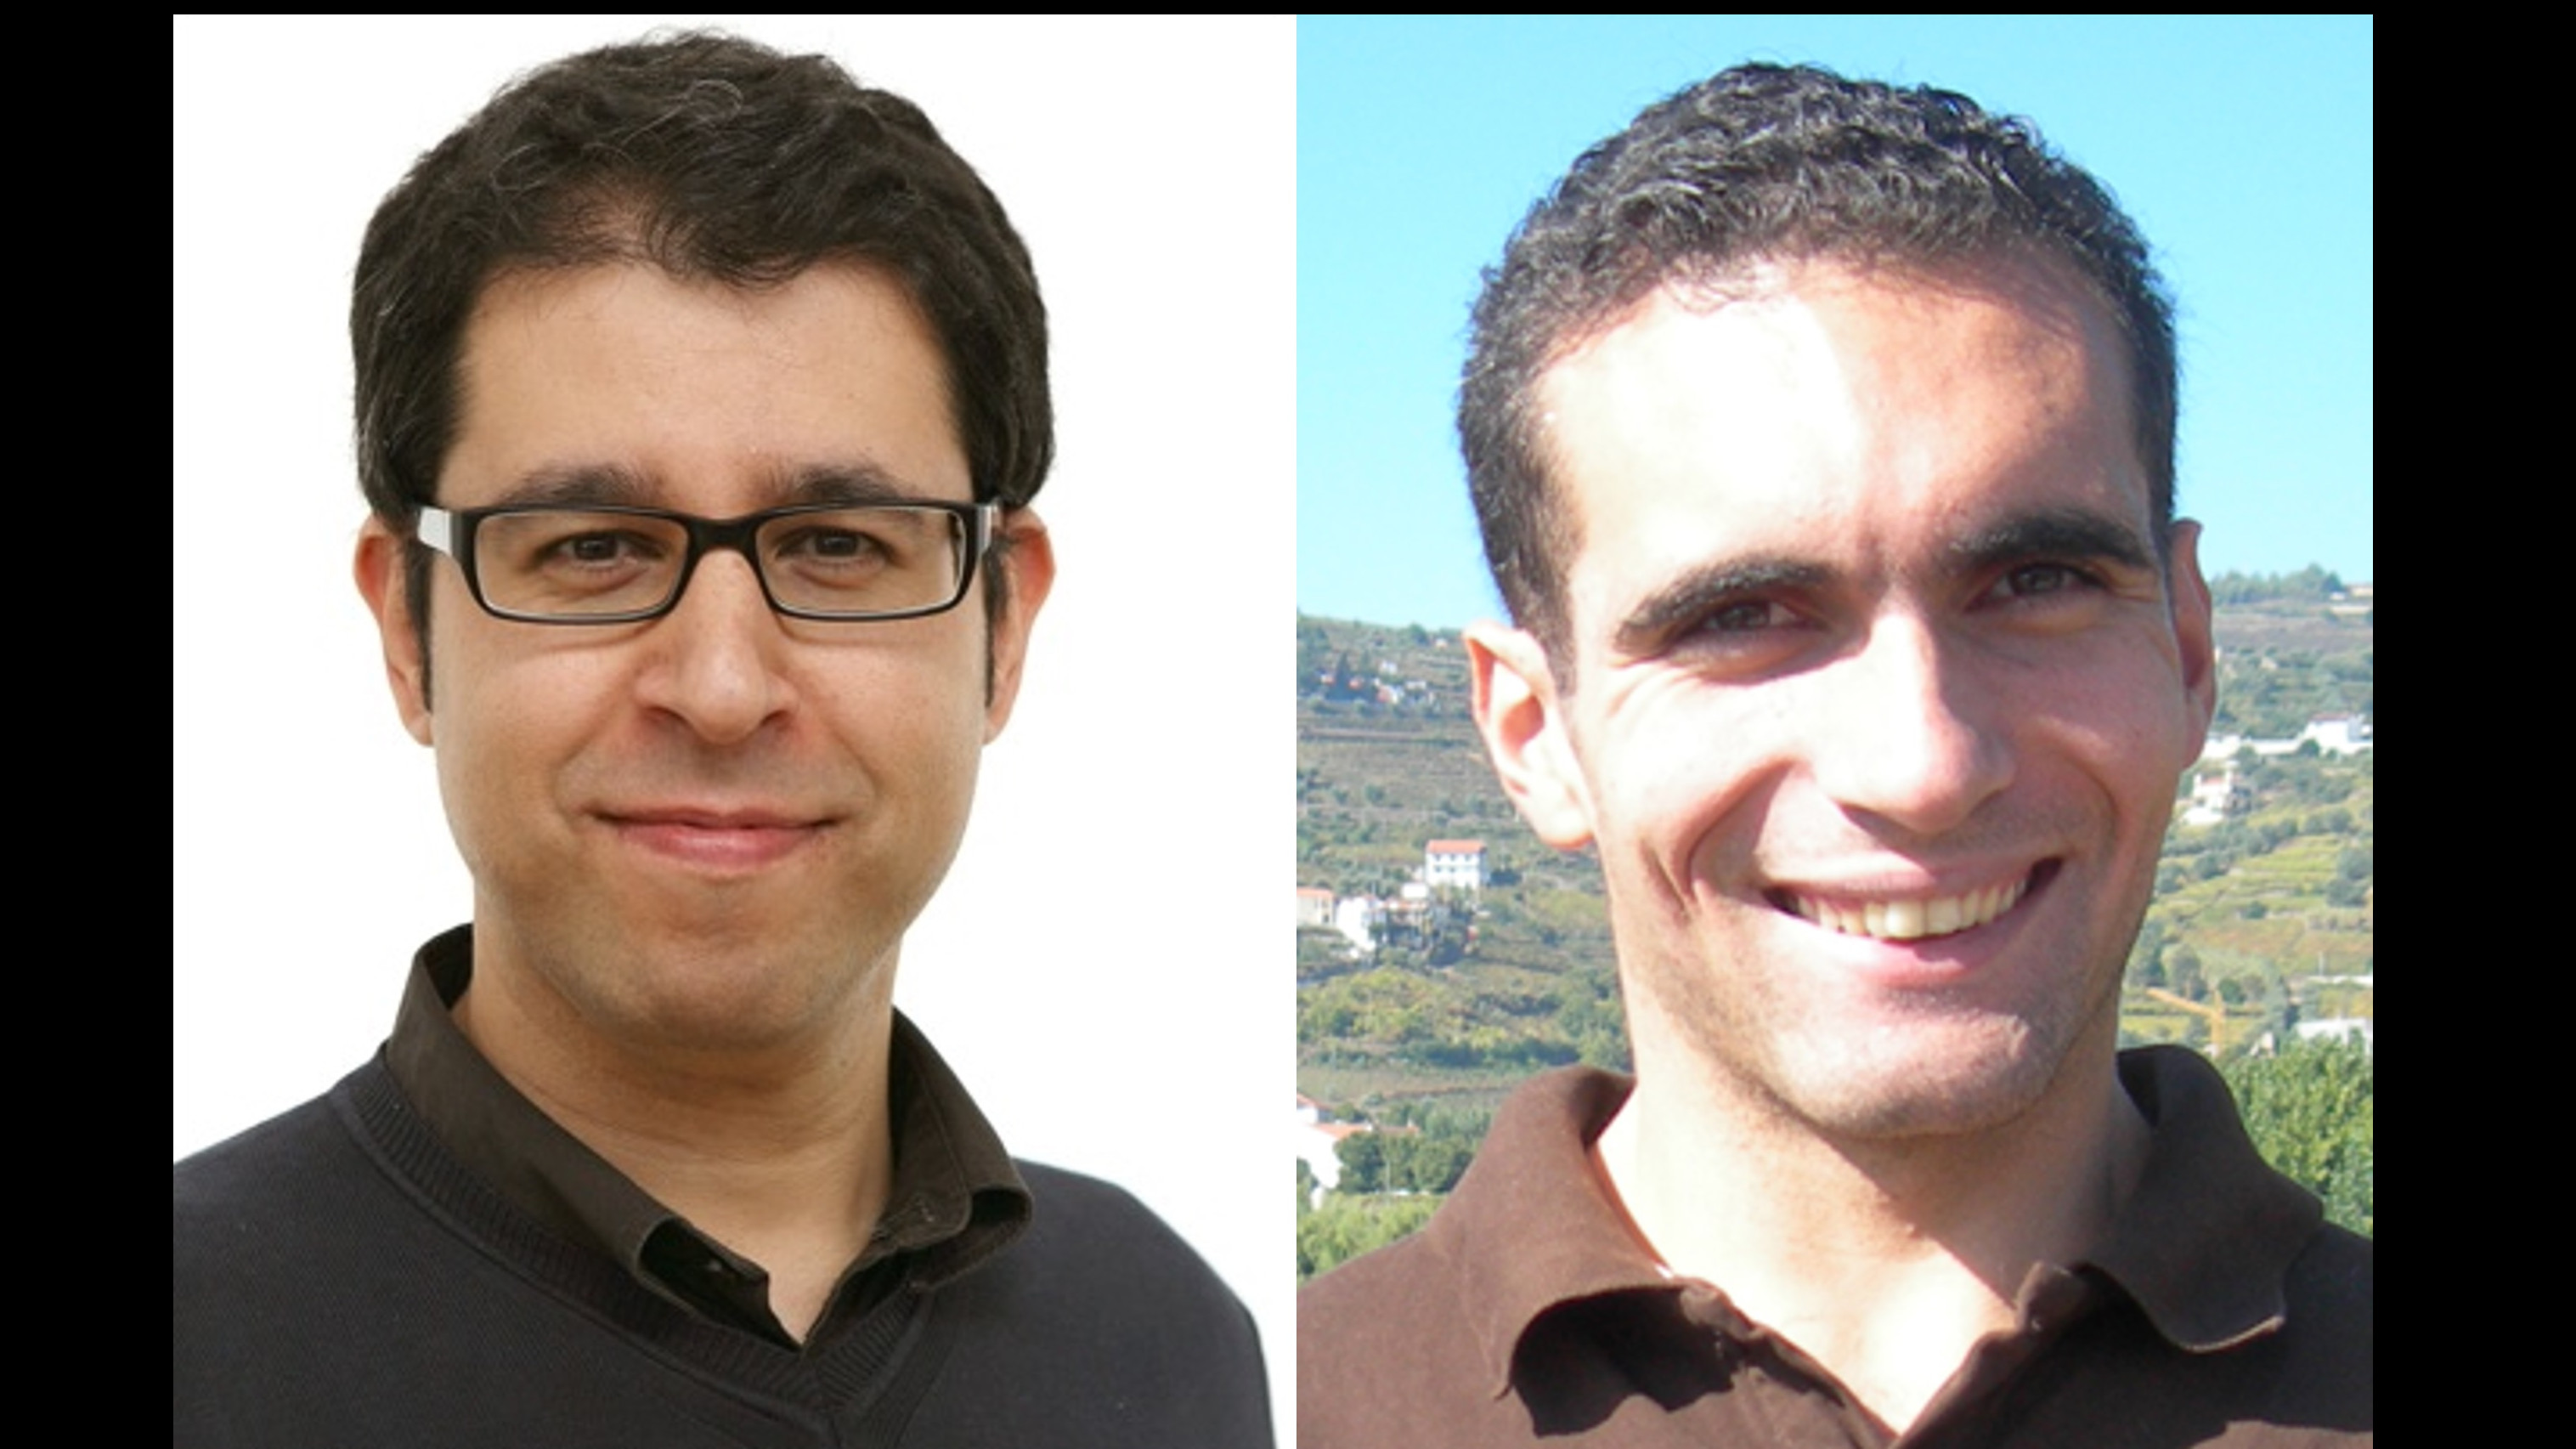 Faculties Gonçalo Figueira and Jorge Vieira promoted to Associate Professors